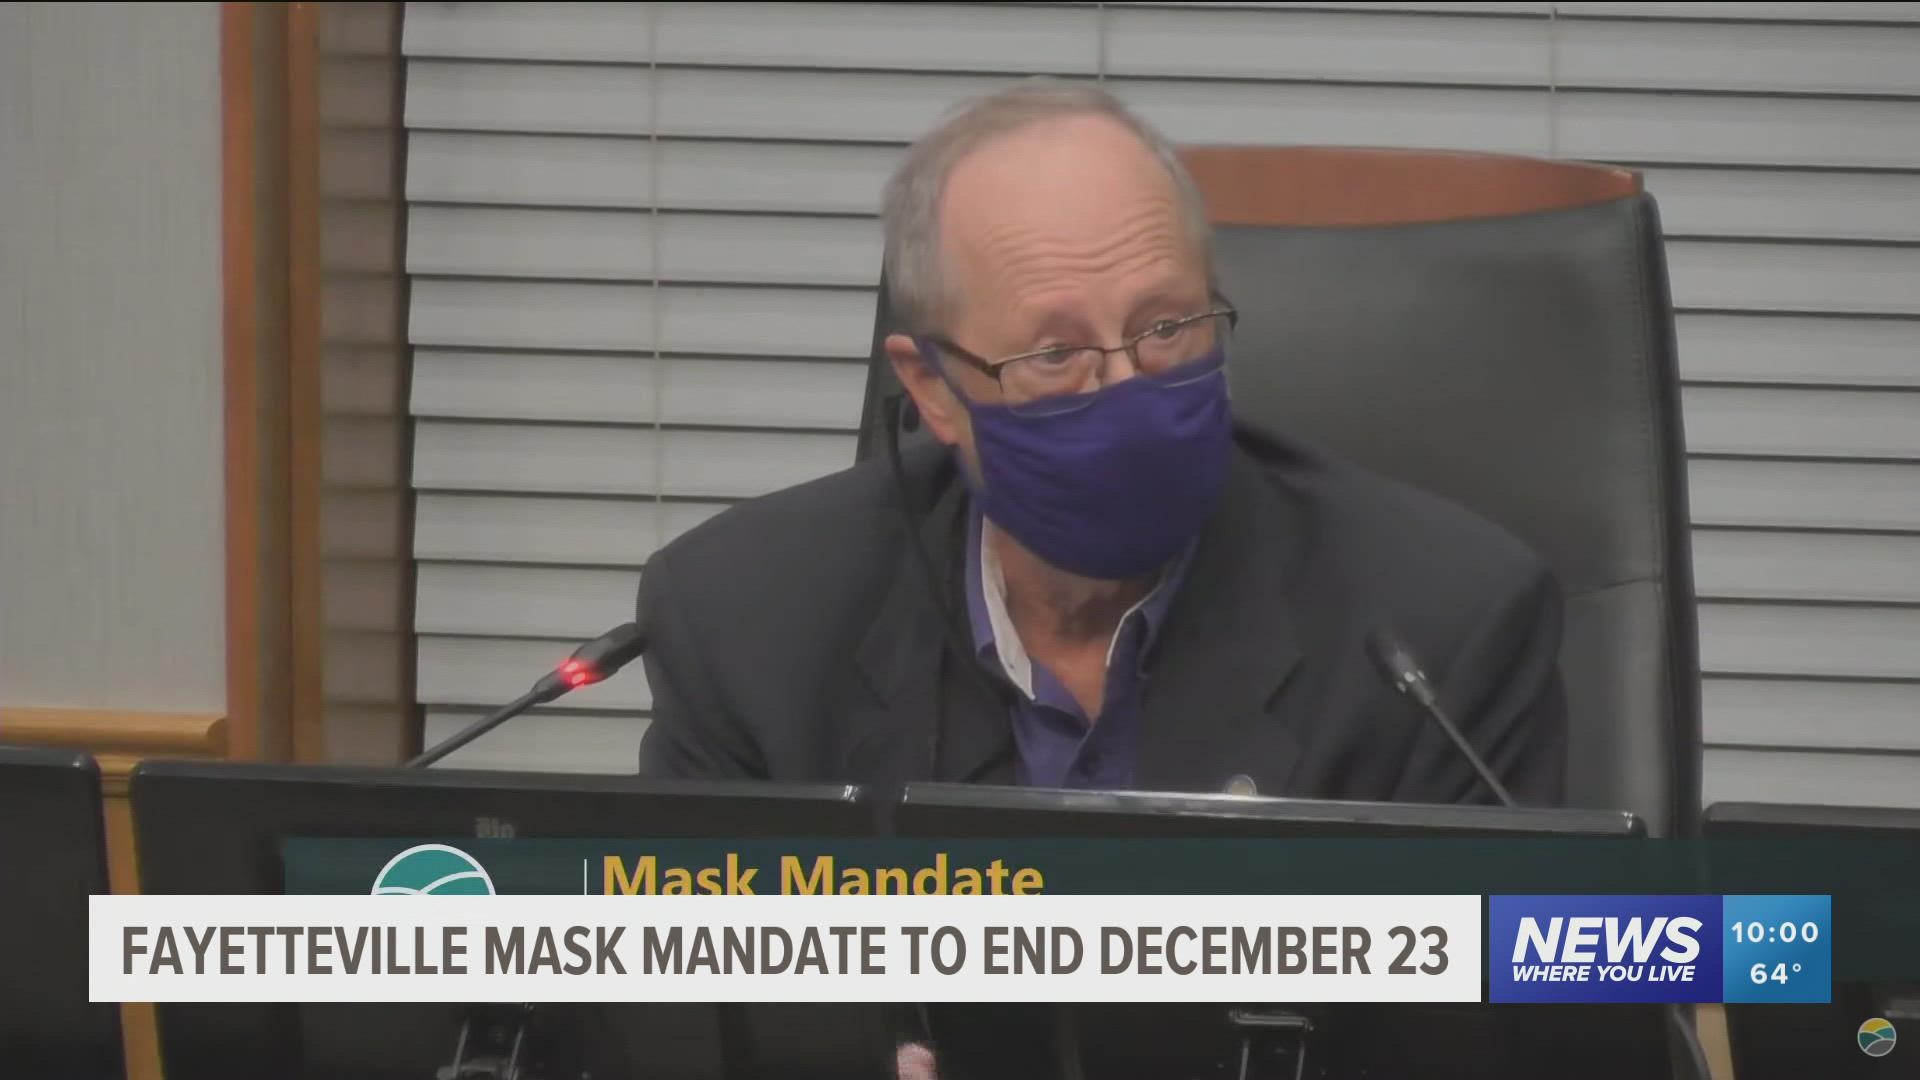 The city's mask mandate can end on Dec. 23, 2021, if hospitals in the region do not see a significant spike in COVID-19 patients between now and then.